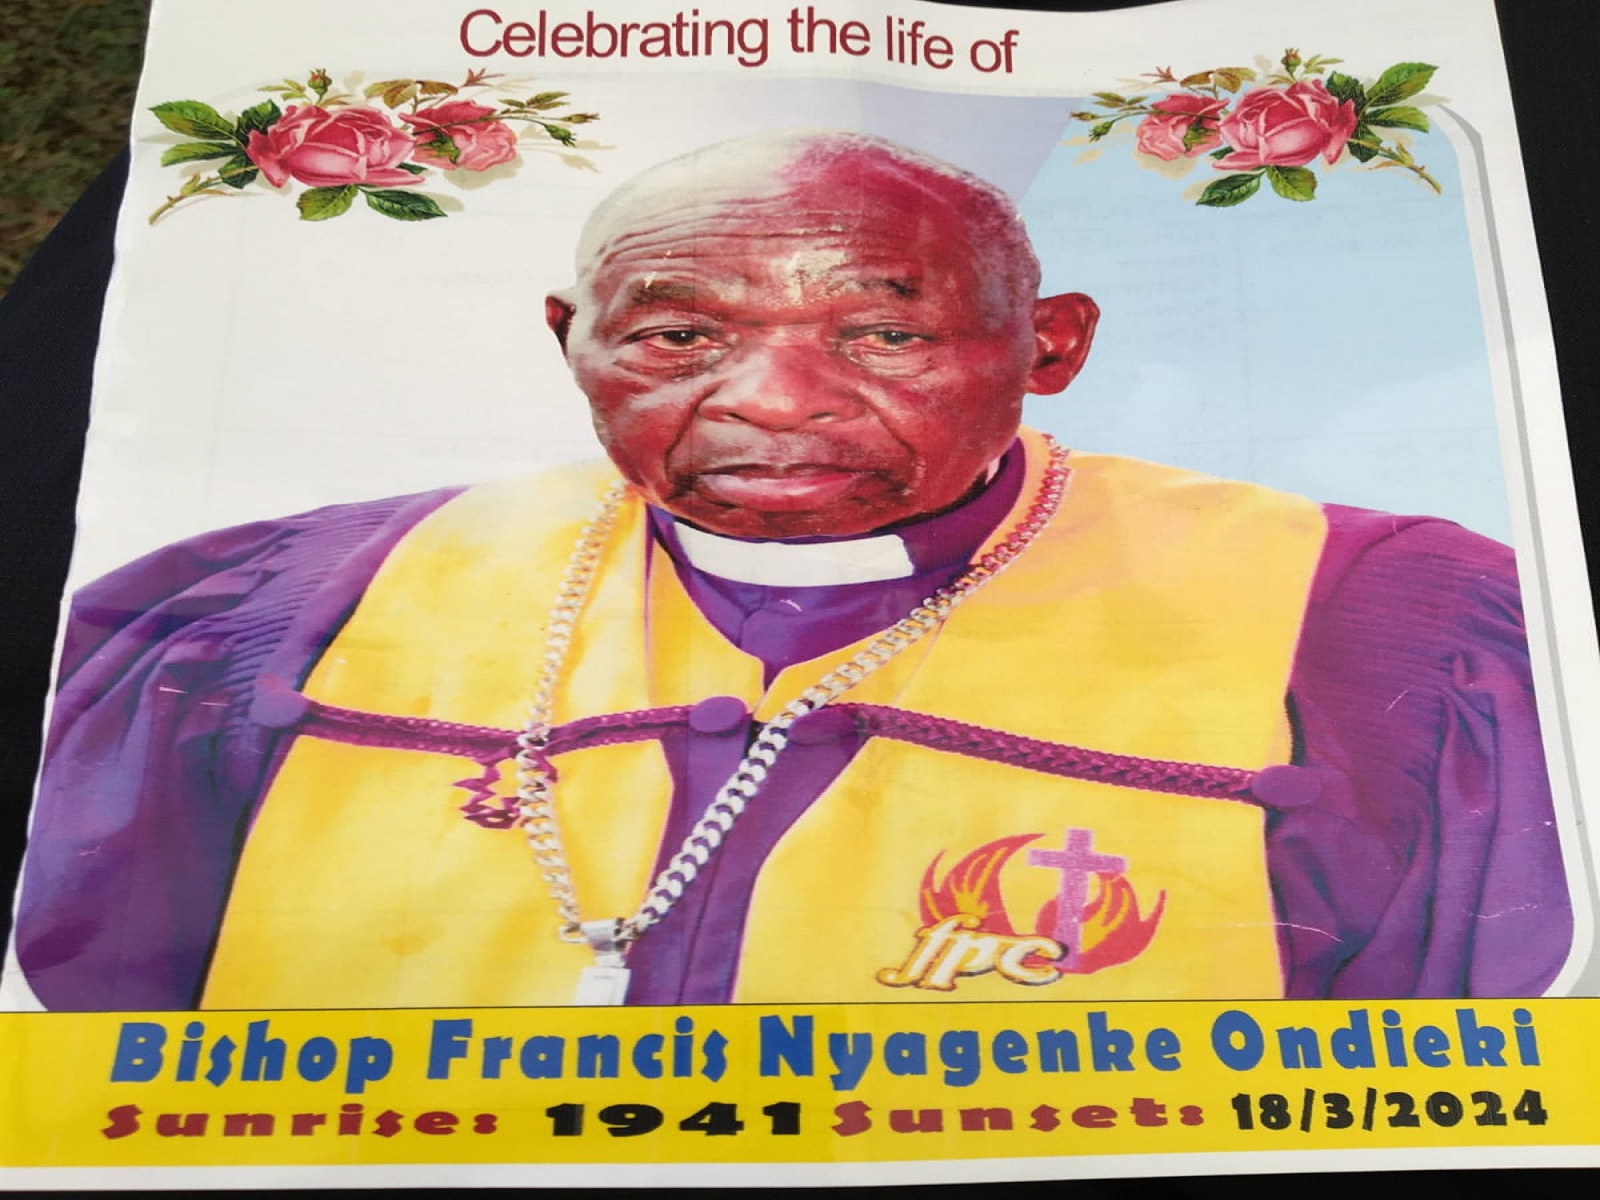 Read more about the article FPFK Church bids farewell to Bishop Nyagenke, aka “Human Being”, who refused to retire at 70 but chose to serve God till his eyes could not see anymore